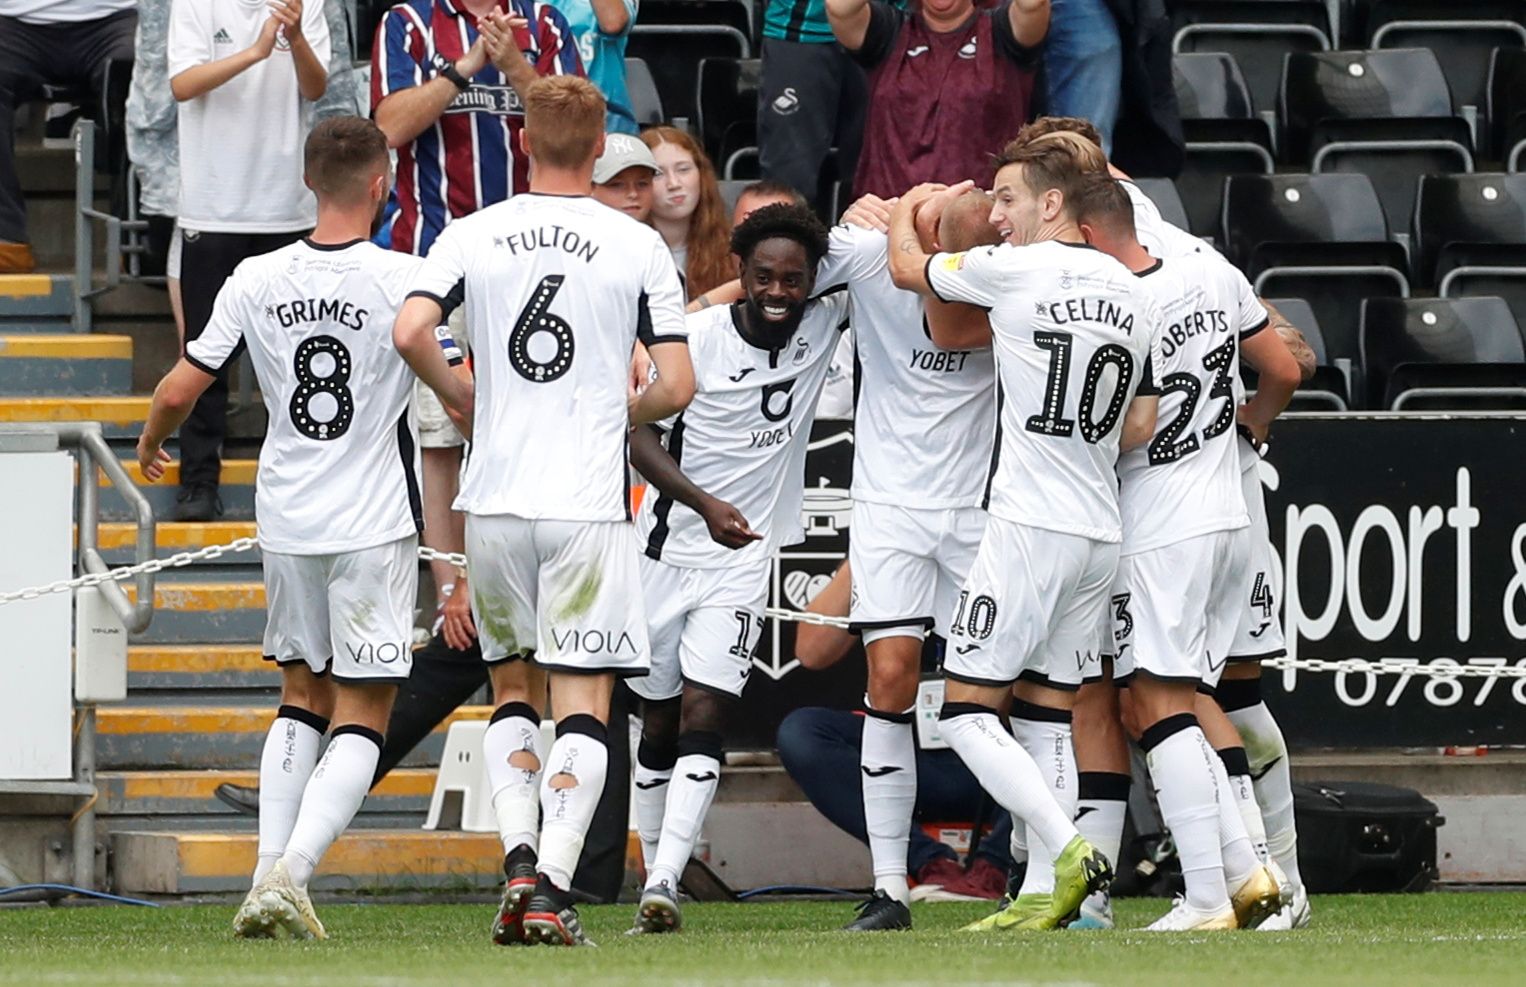 Soccer Football - Championship - Swansea City v Hull City - Liberty Stadium, Swansea, Britain - August 3, 2019   Swansea City's Mike Van Der Hoorn celebrates scoring their second goal with teammates   Action Images/Matthew Childs    EDITORIAL USE ONLY. No use with unauthorized audio, video, data, fixture lists, club/league logos or 